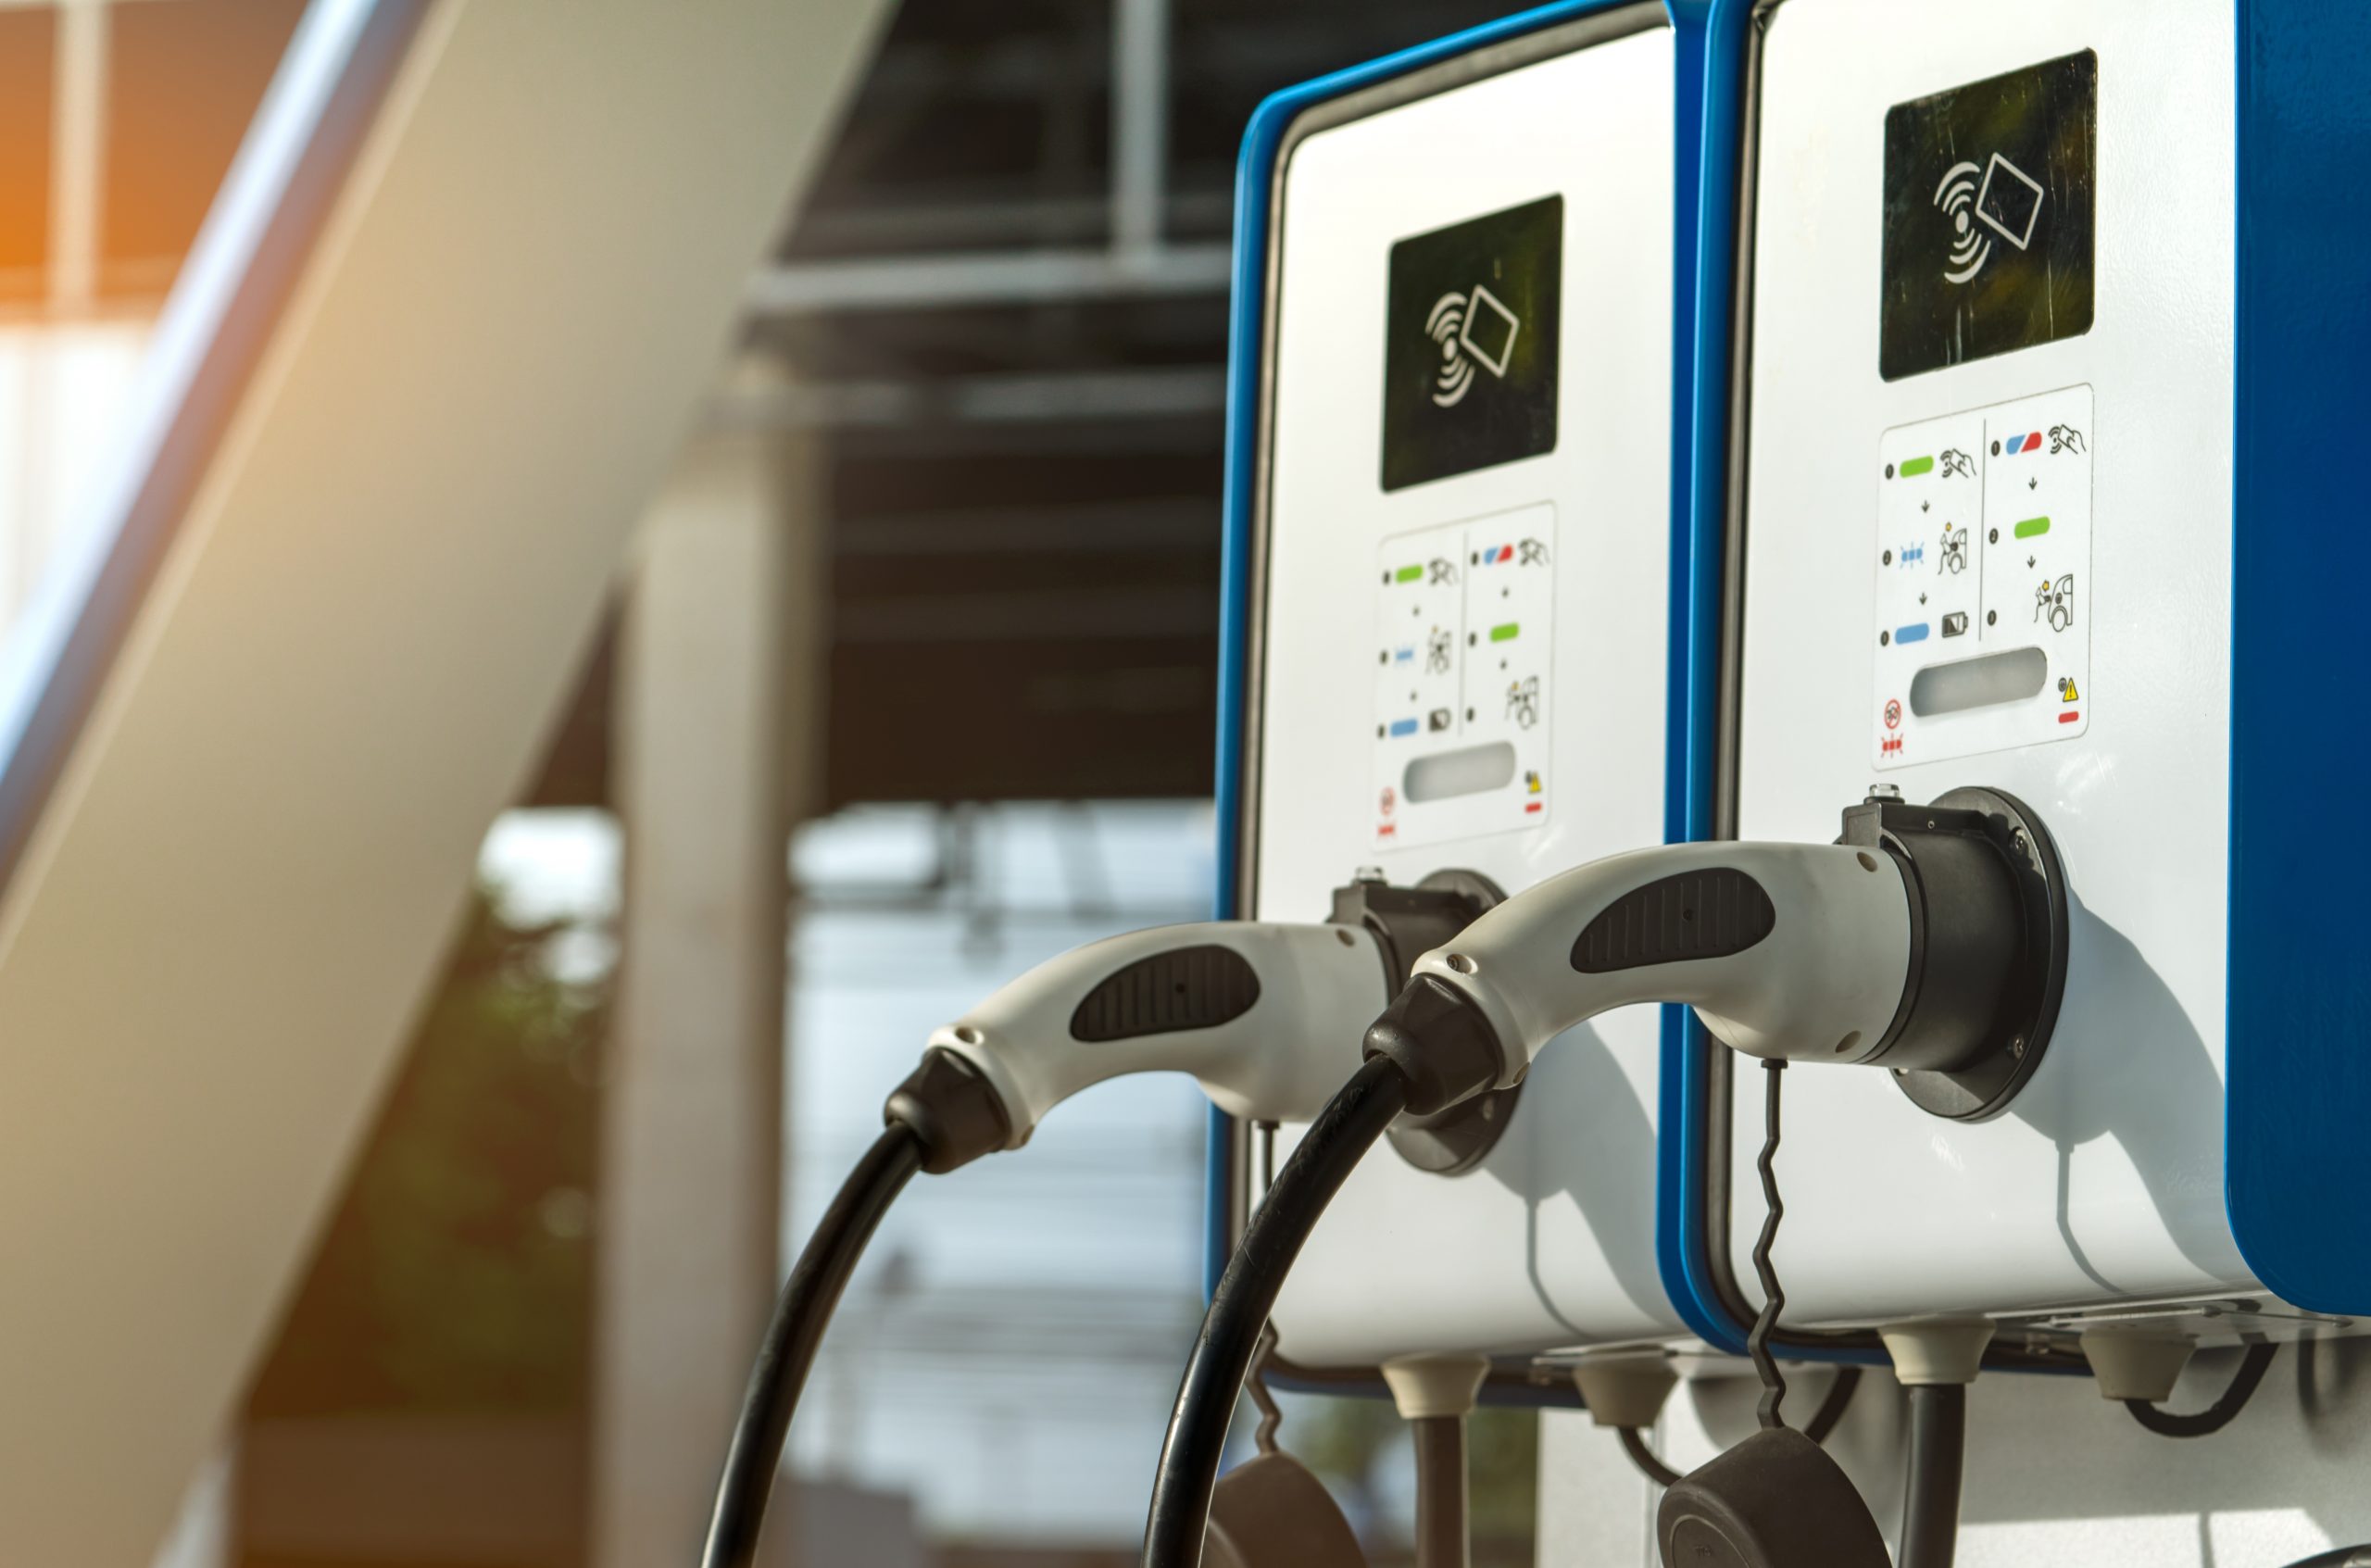 Electric car charging station. Plug for vehicle with electric motor. Coin-operated charging station. Clean energy power. Commercial charging station. Charging point. Infrastructure policy.